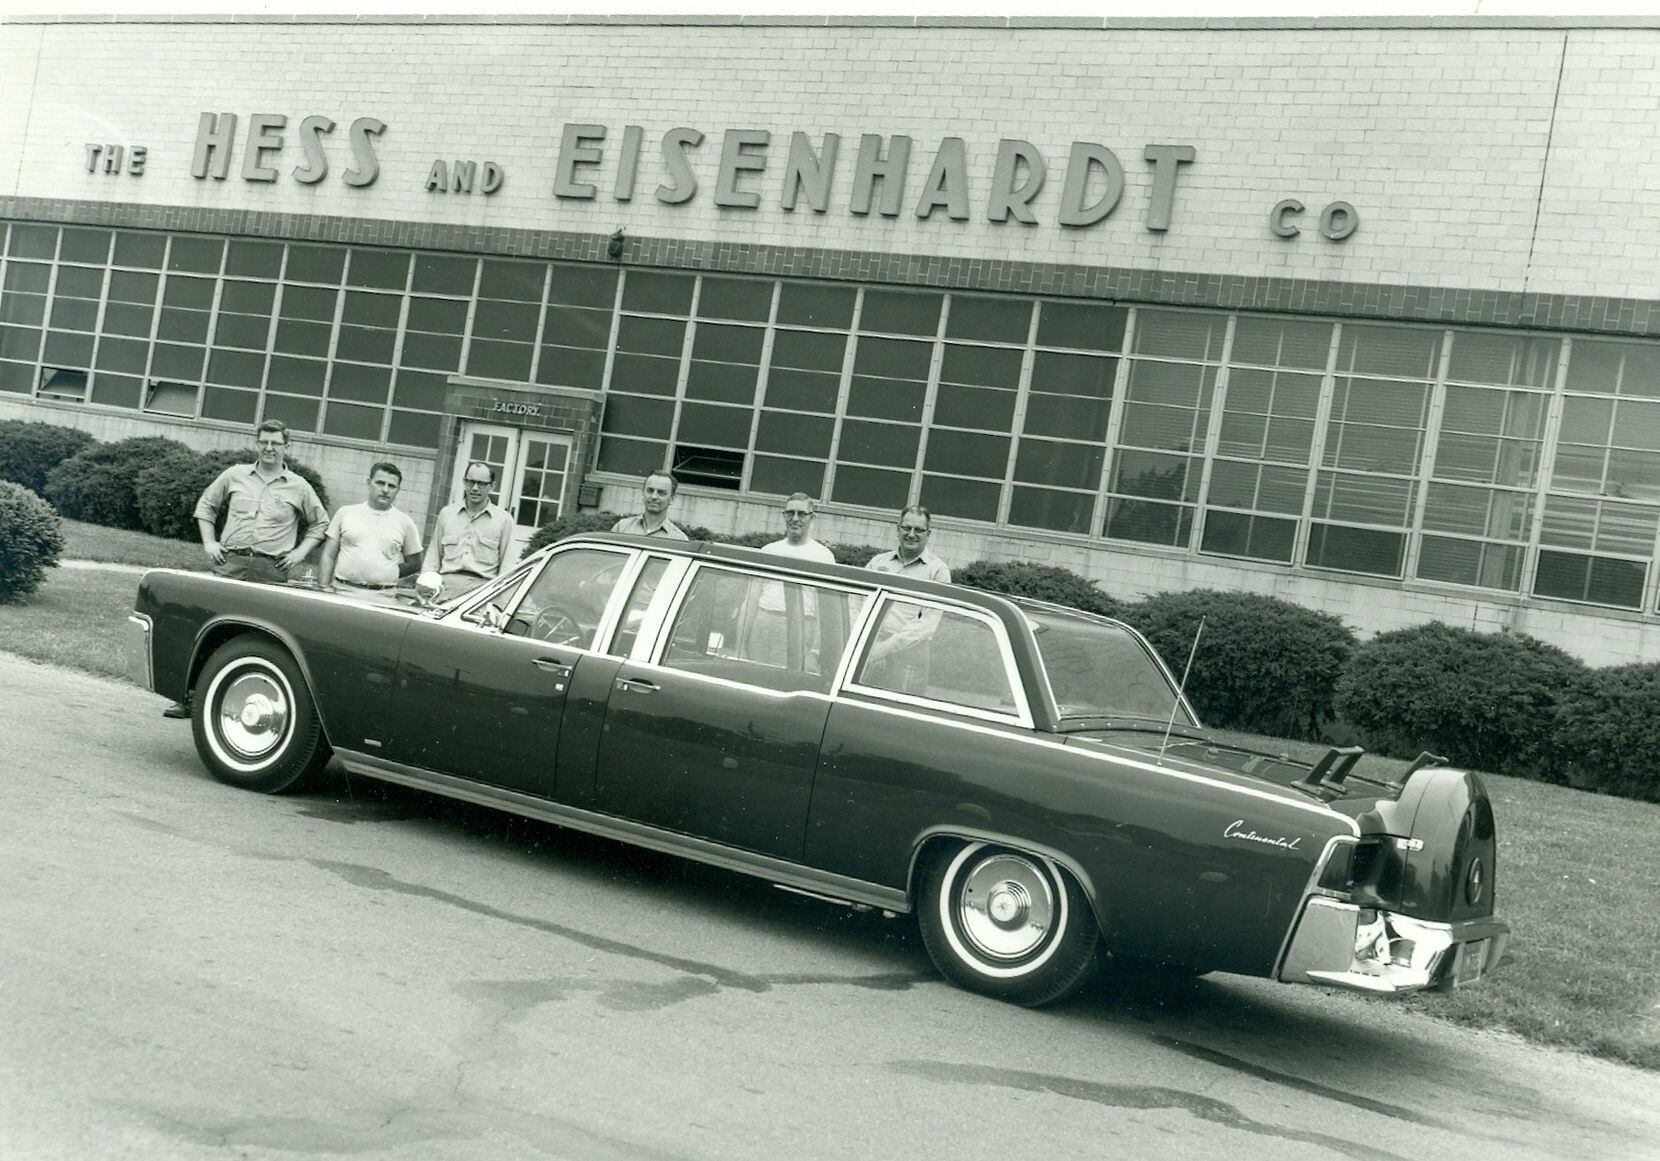 The 1961 Lincoln limousine (code name: X-100) in which John F. Kennedy was assassinated on a trip to Dallas has been returned to Ford and its partner Hess & Eisenhardt to rebuild and improve its safety and design .  The project began around December 1963 and was dubbed the "Quick fix."  